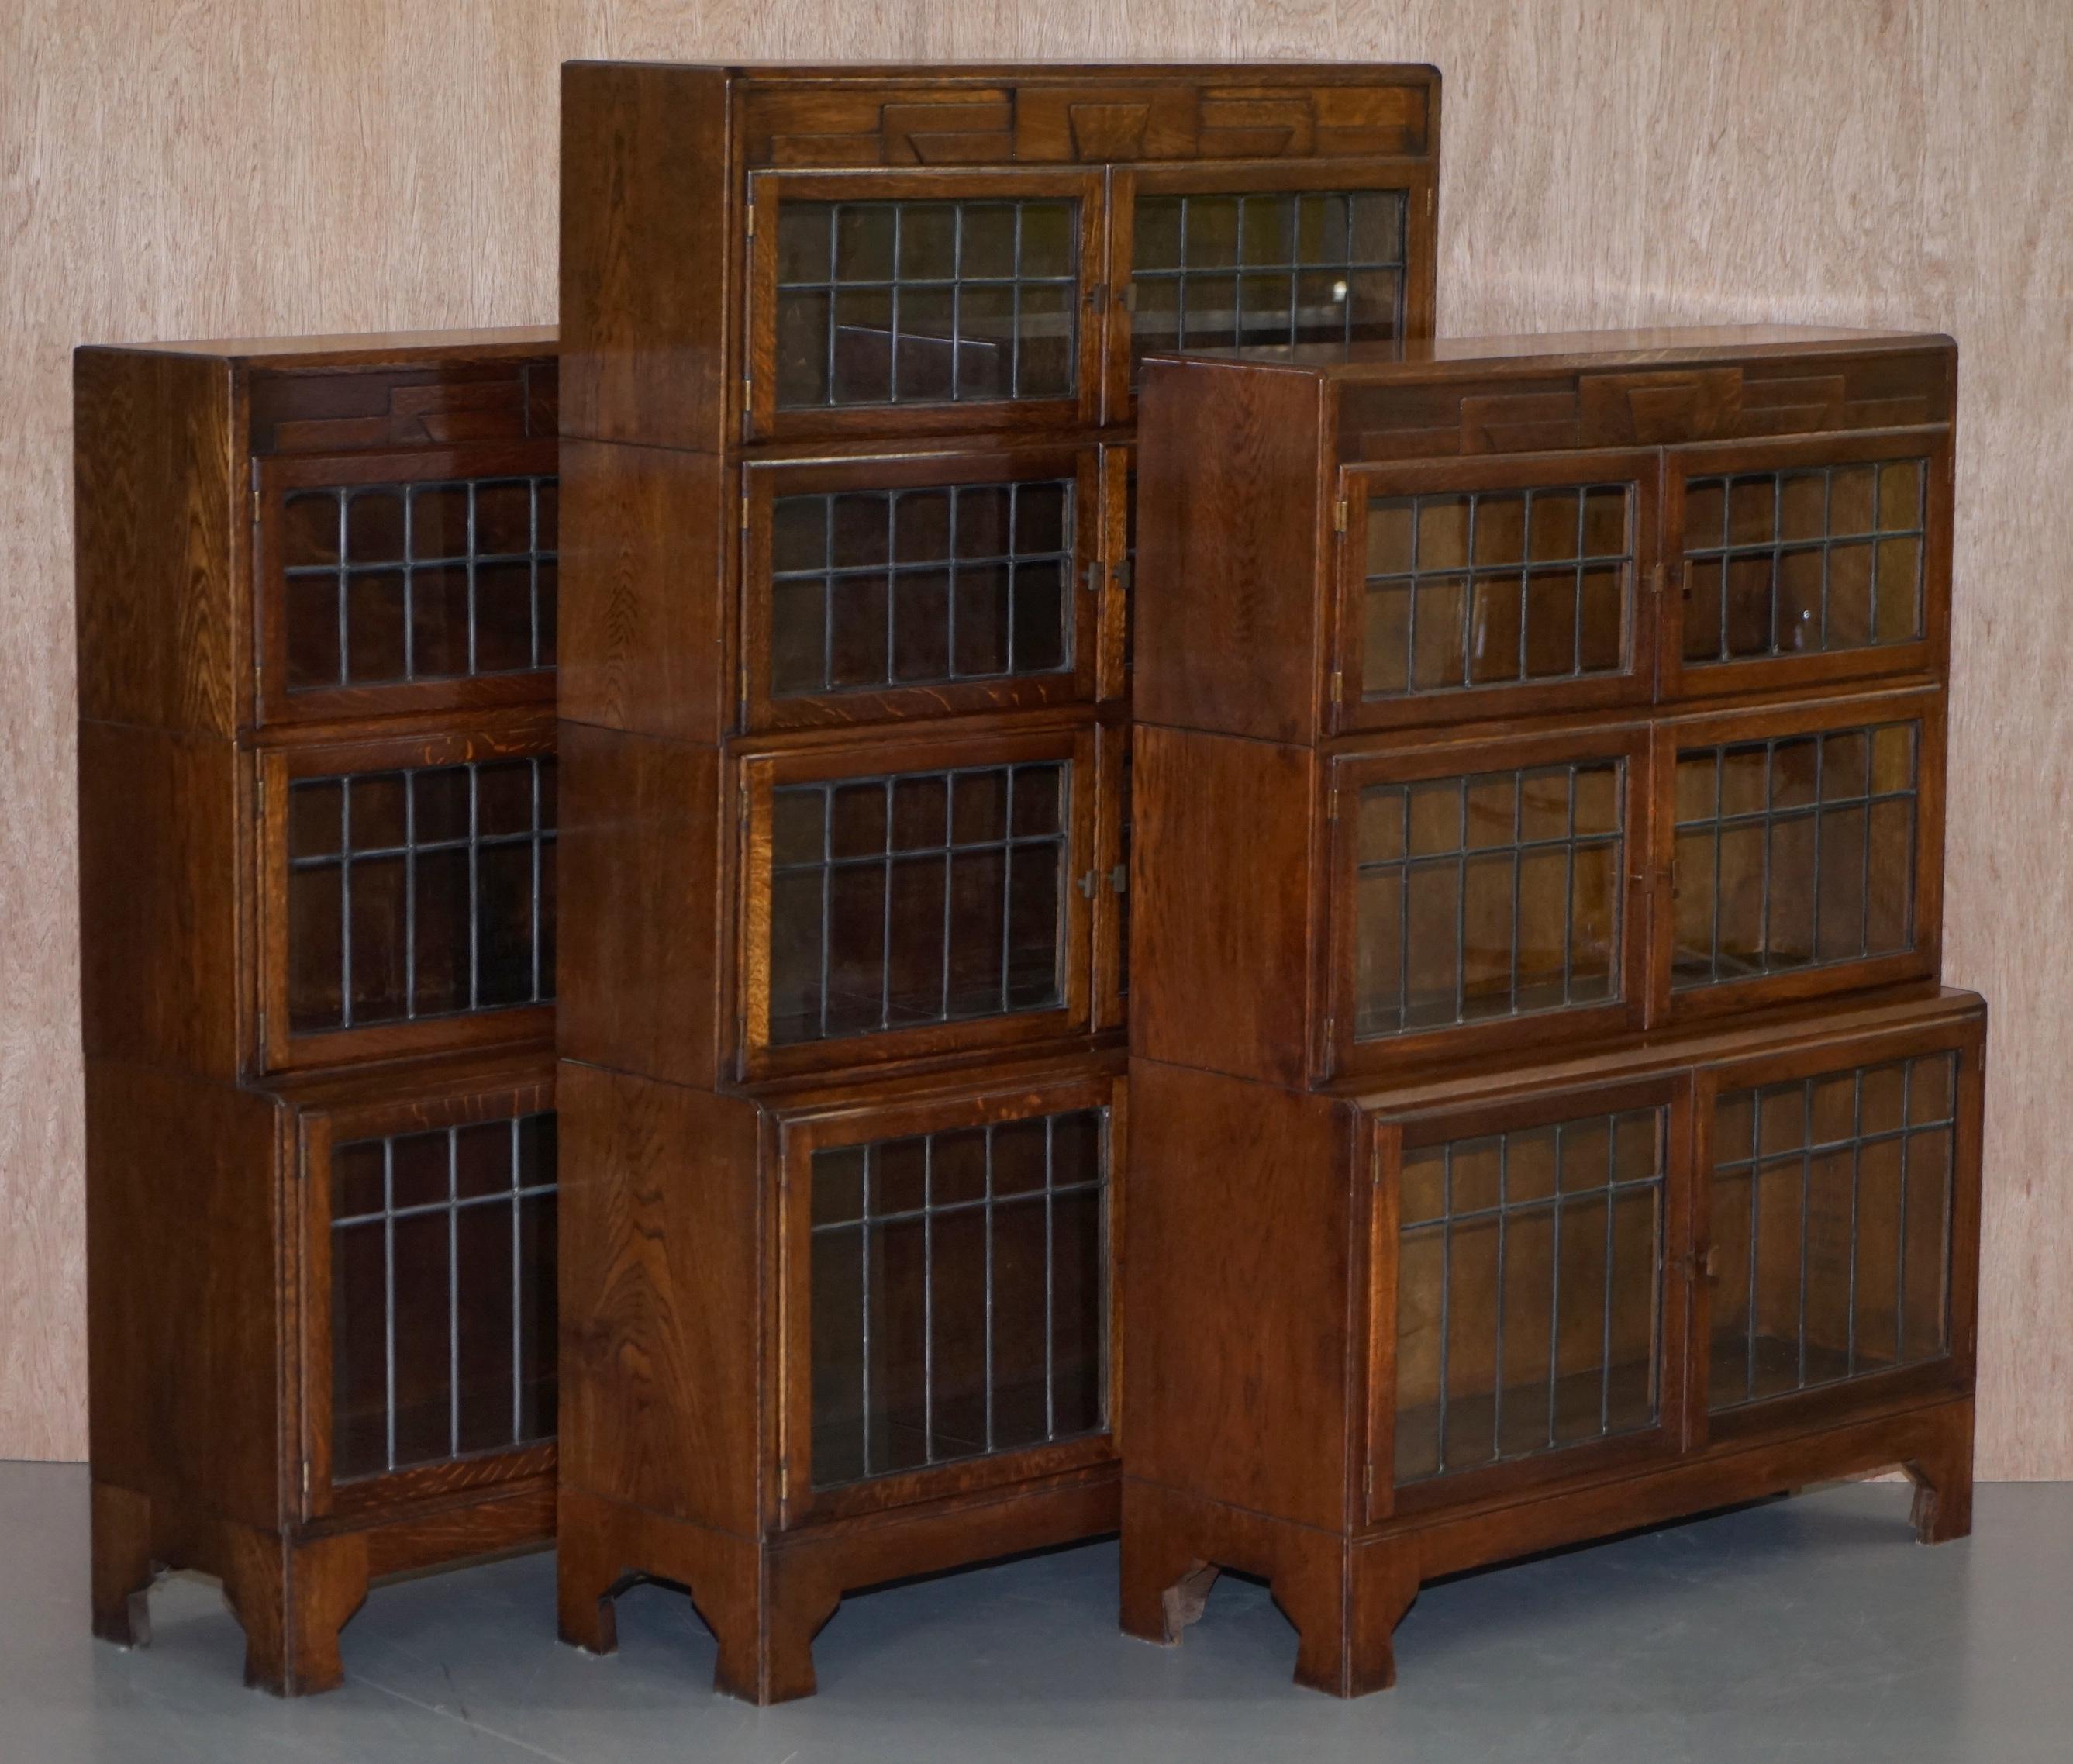 We are delighted to offer for sale this lovely suite of three early circa 1920 fully restored Minty oxford stacking legal bookcases in solid oak made in the Art Deco style

A very good looking and well-made set, there were a number of companies